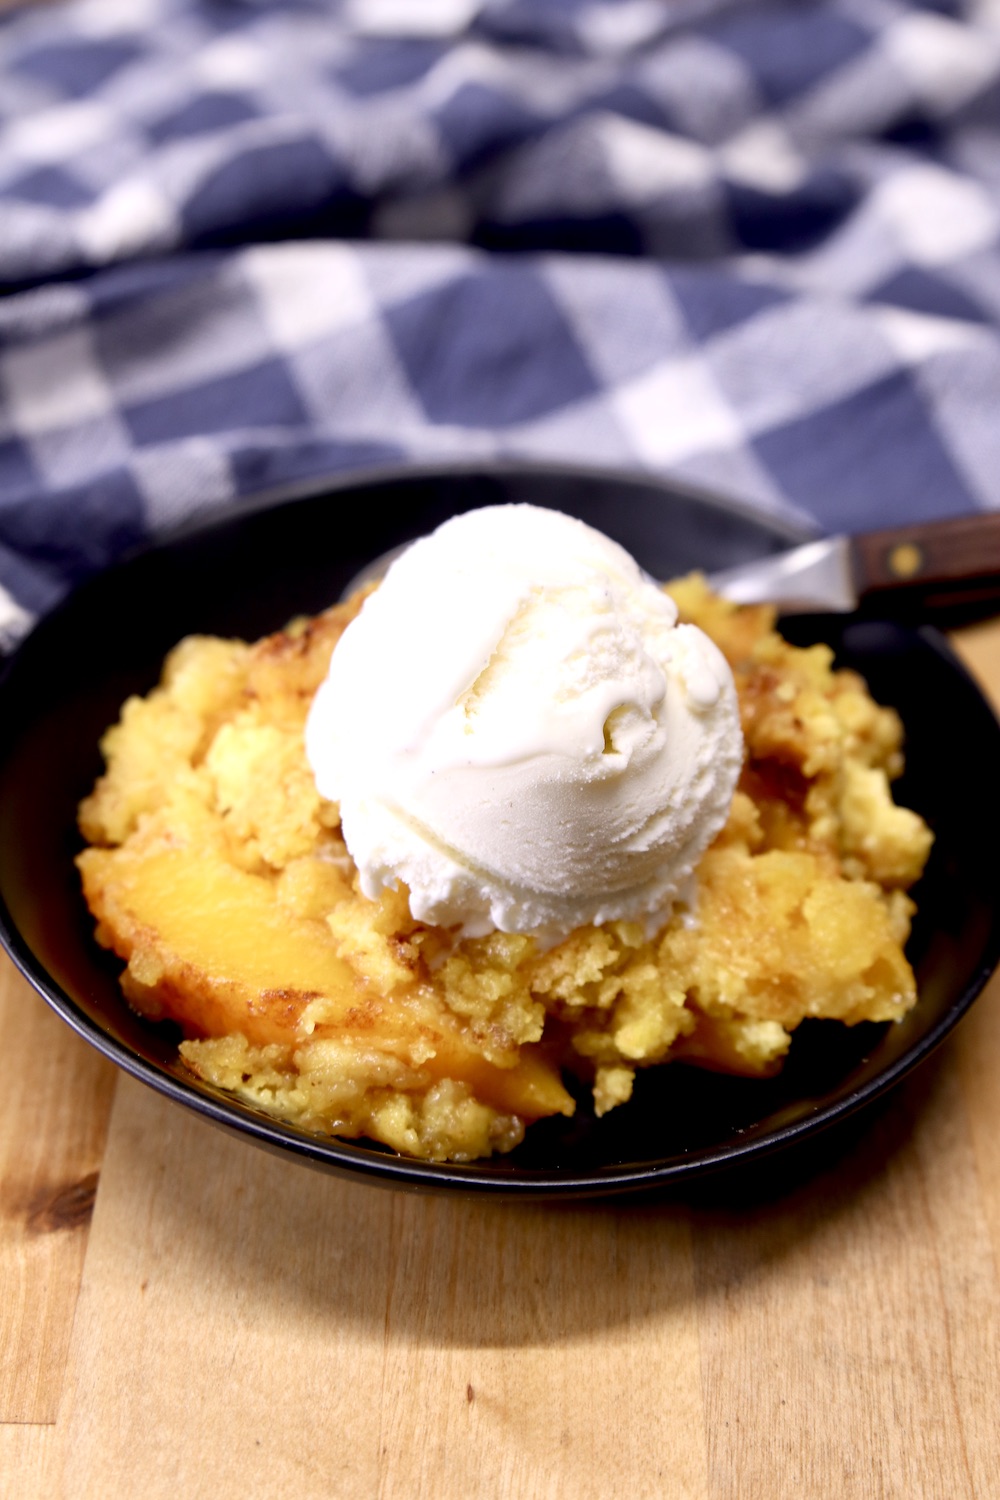 Peach Dump Cake in a black bowl with vanilla ice cream - blue towel in background